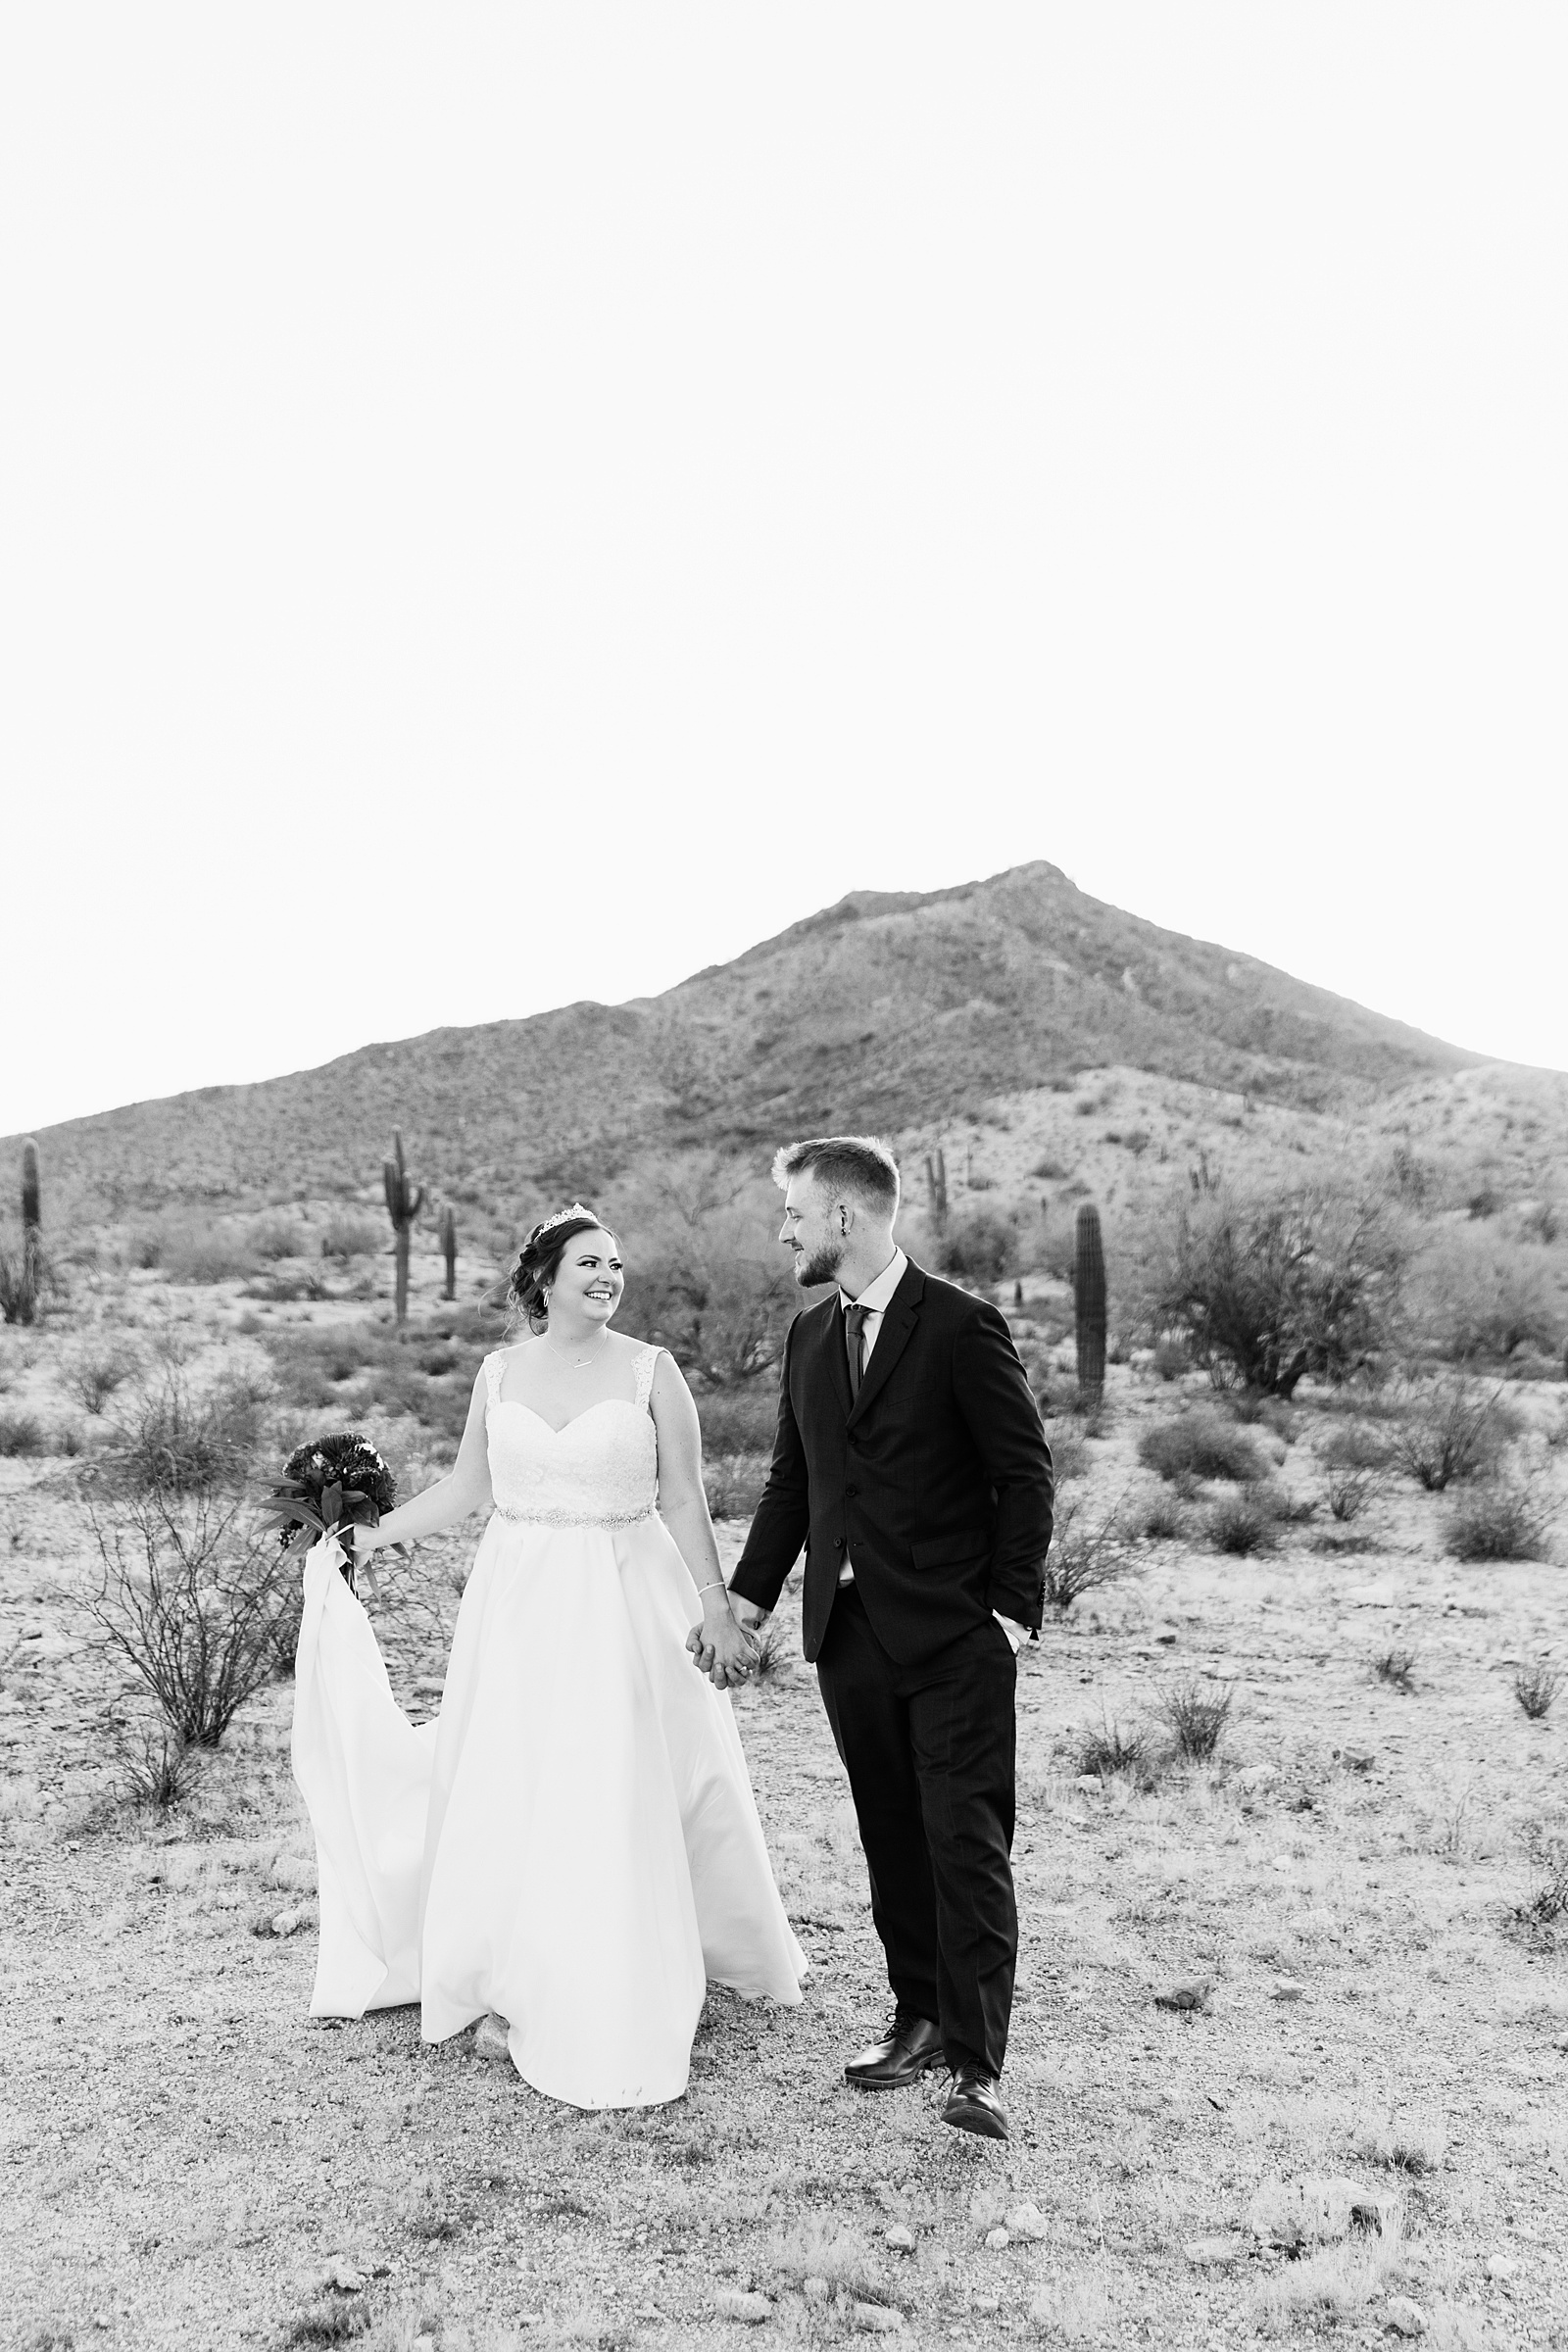 Bride and groom walking together during their intimate desert wedding by Arizona wedding photographer Juniper and Co Photography.